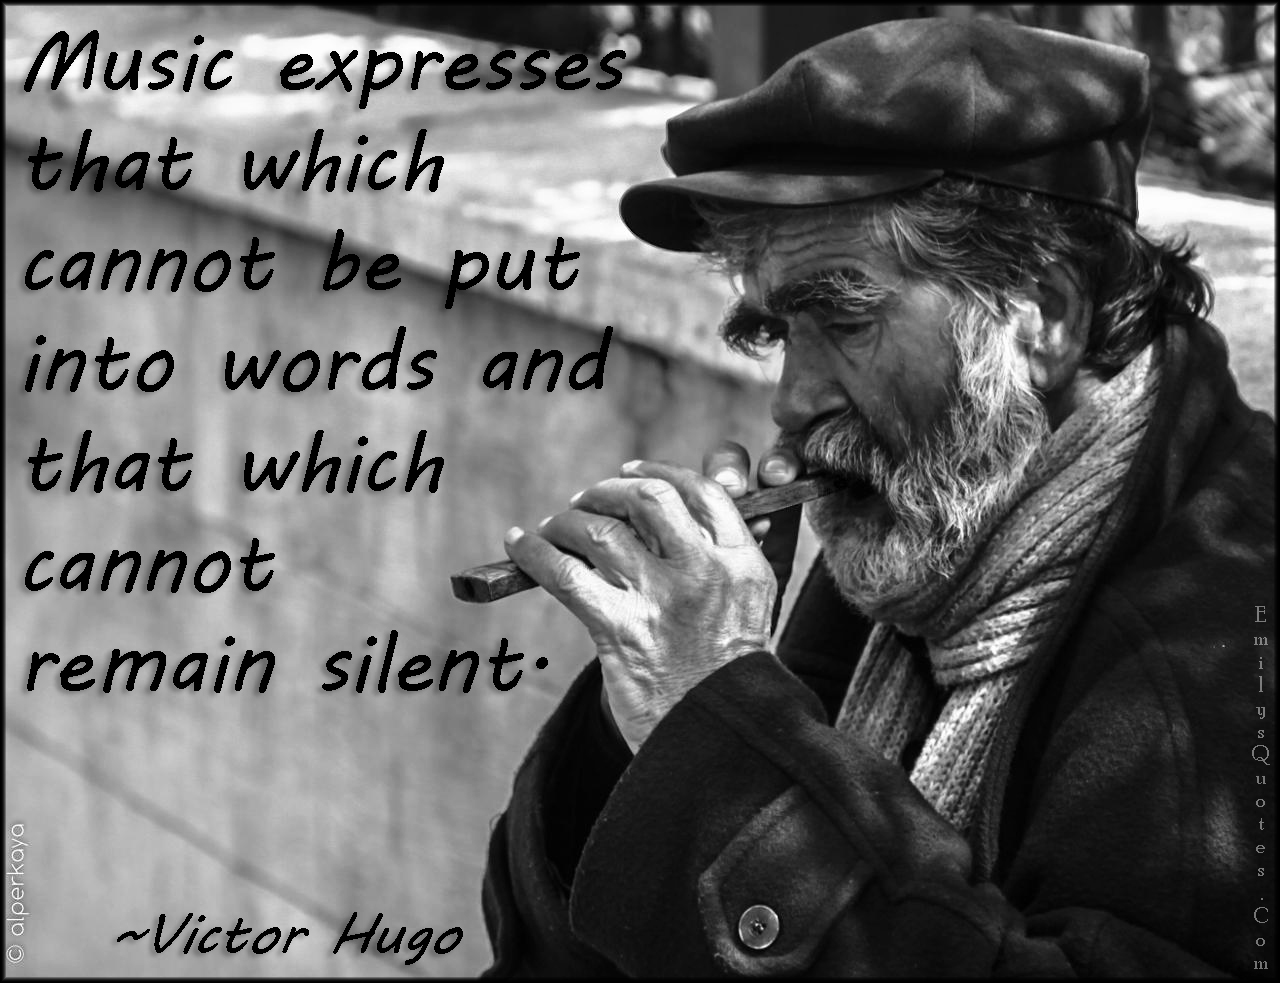 Music expresses that which cannot be put into words and that which cannot remain silent